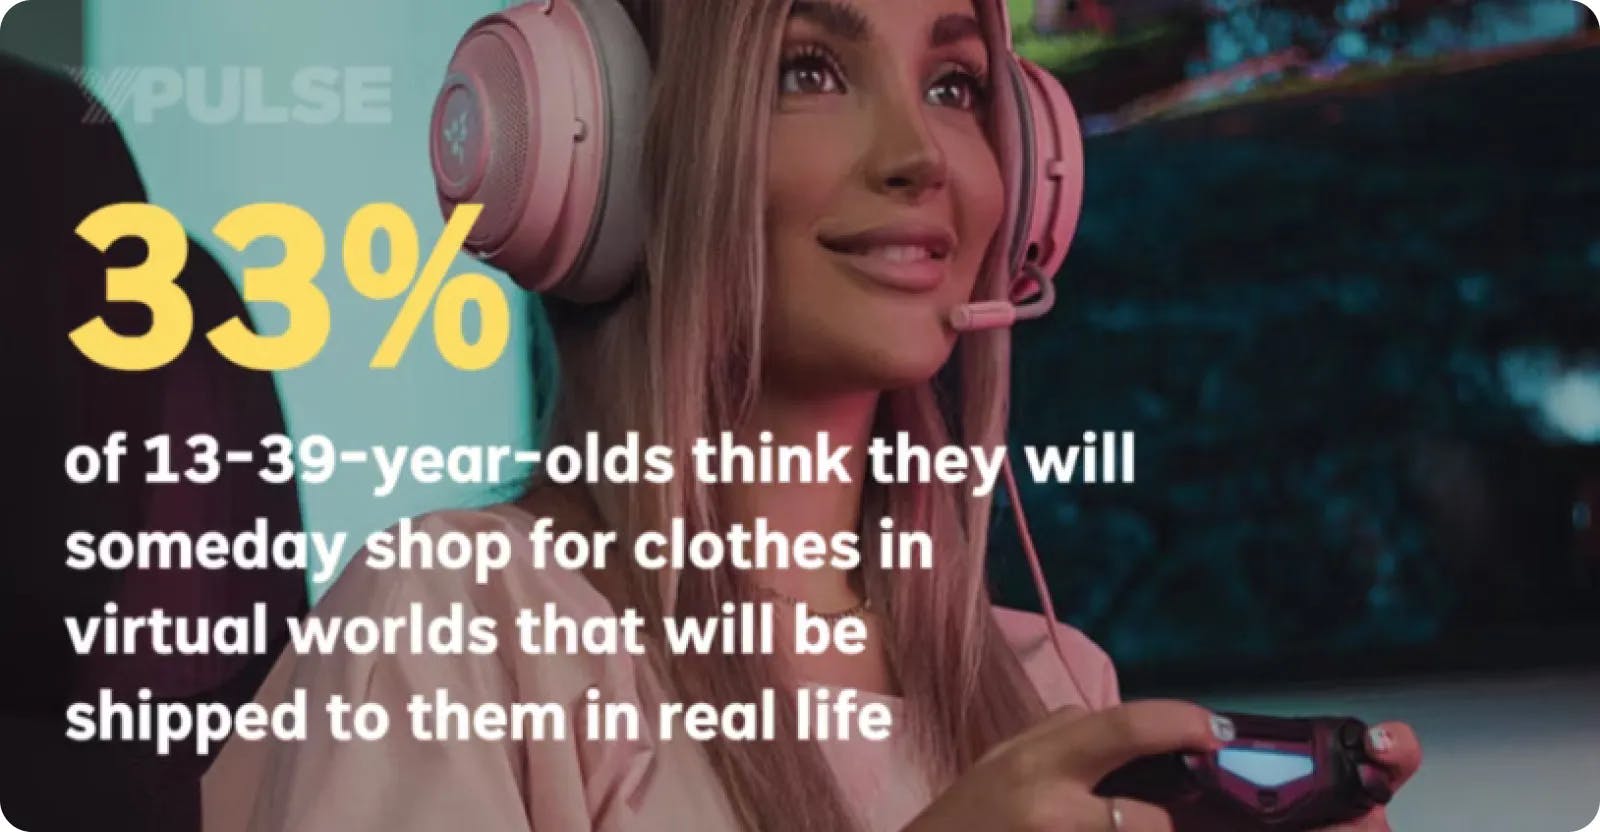 33% of 13-39 year olds think they will someday shop for clothes in virtual words